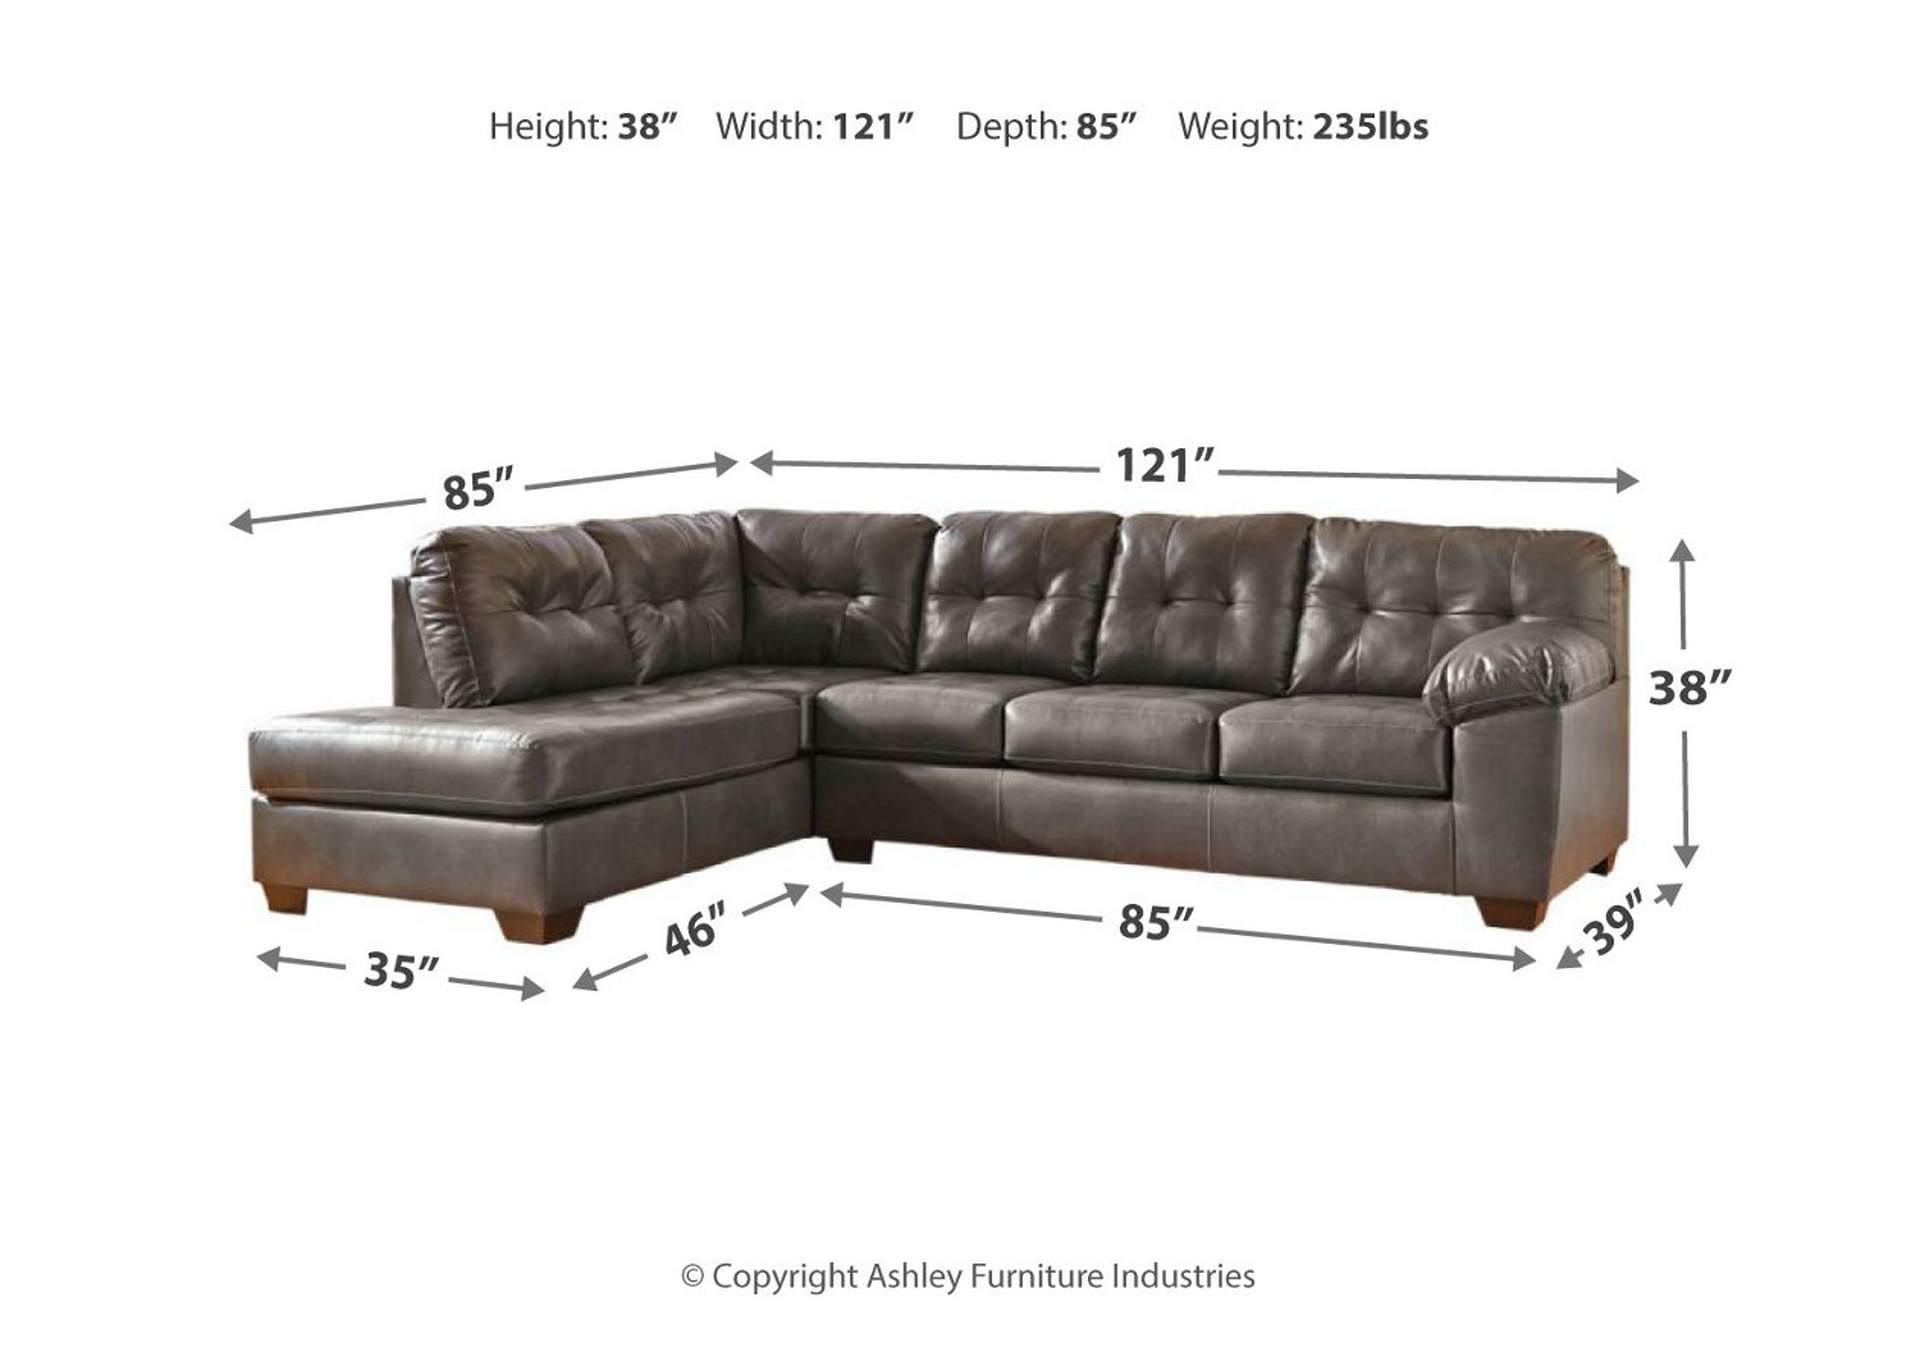 Alliston 2-Piece Sectional with Chaise,Signature Design By Ashley